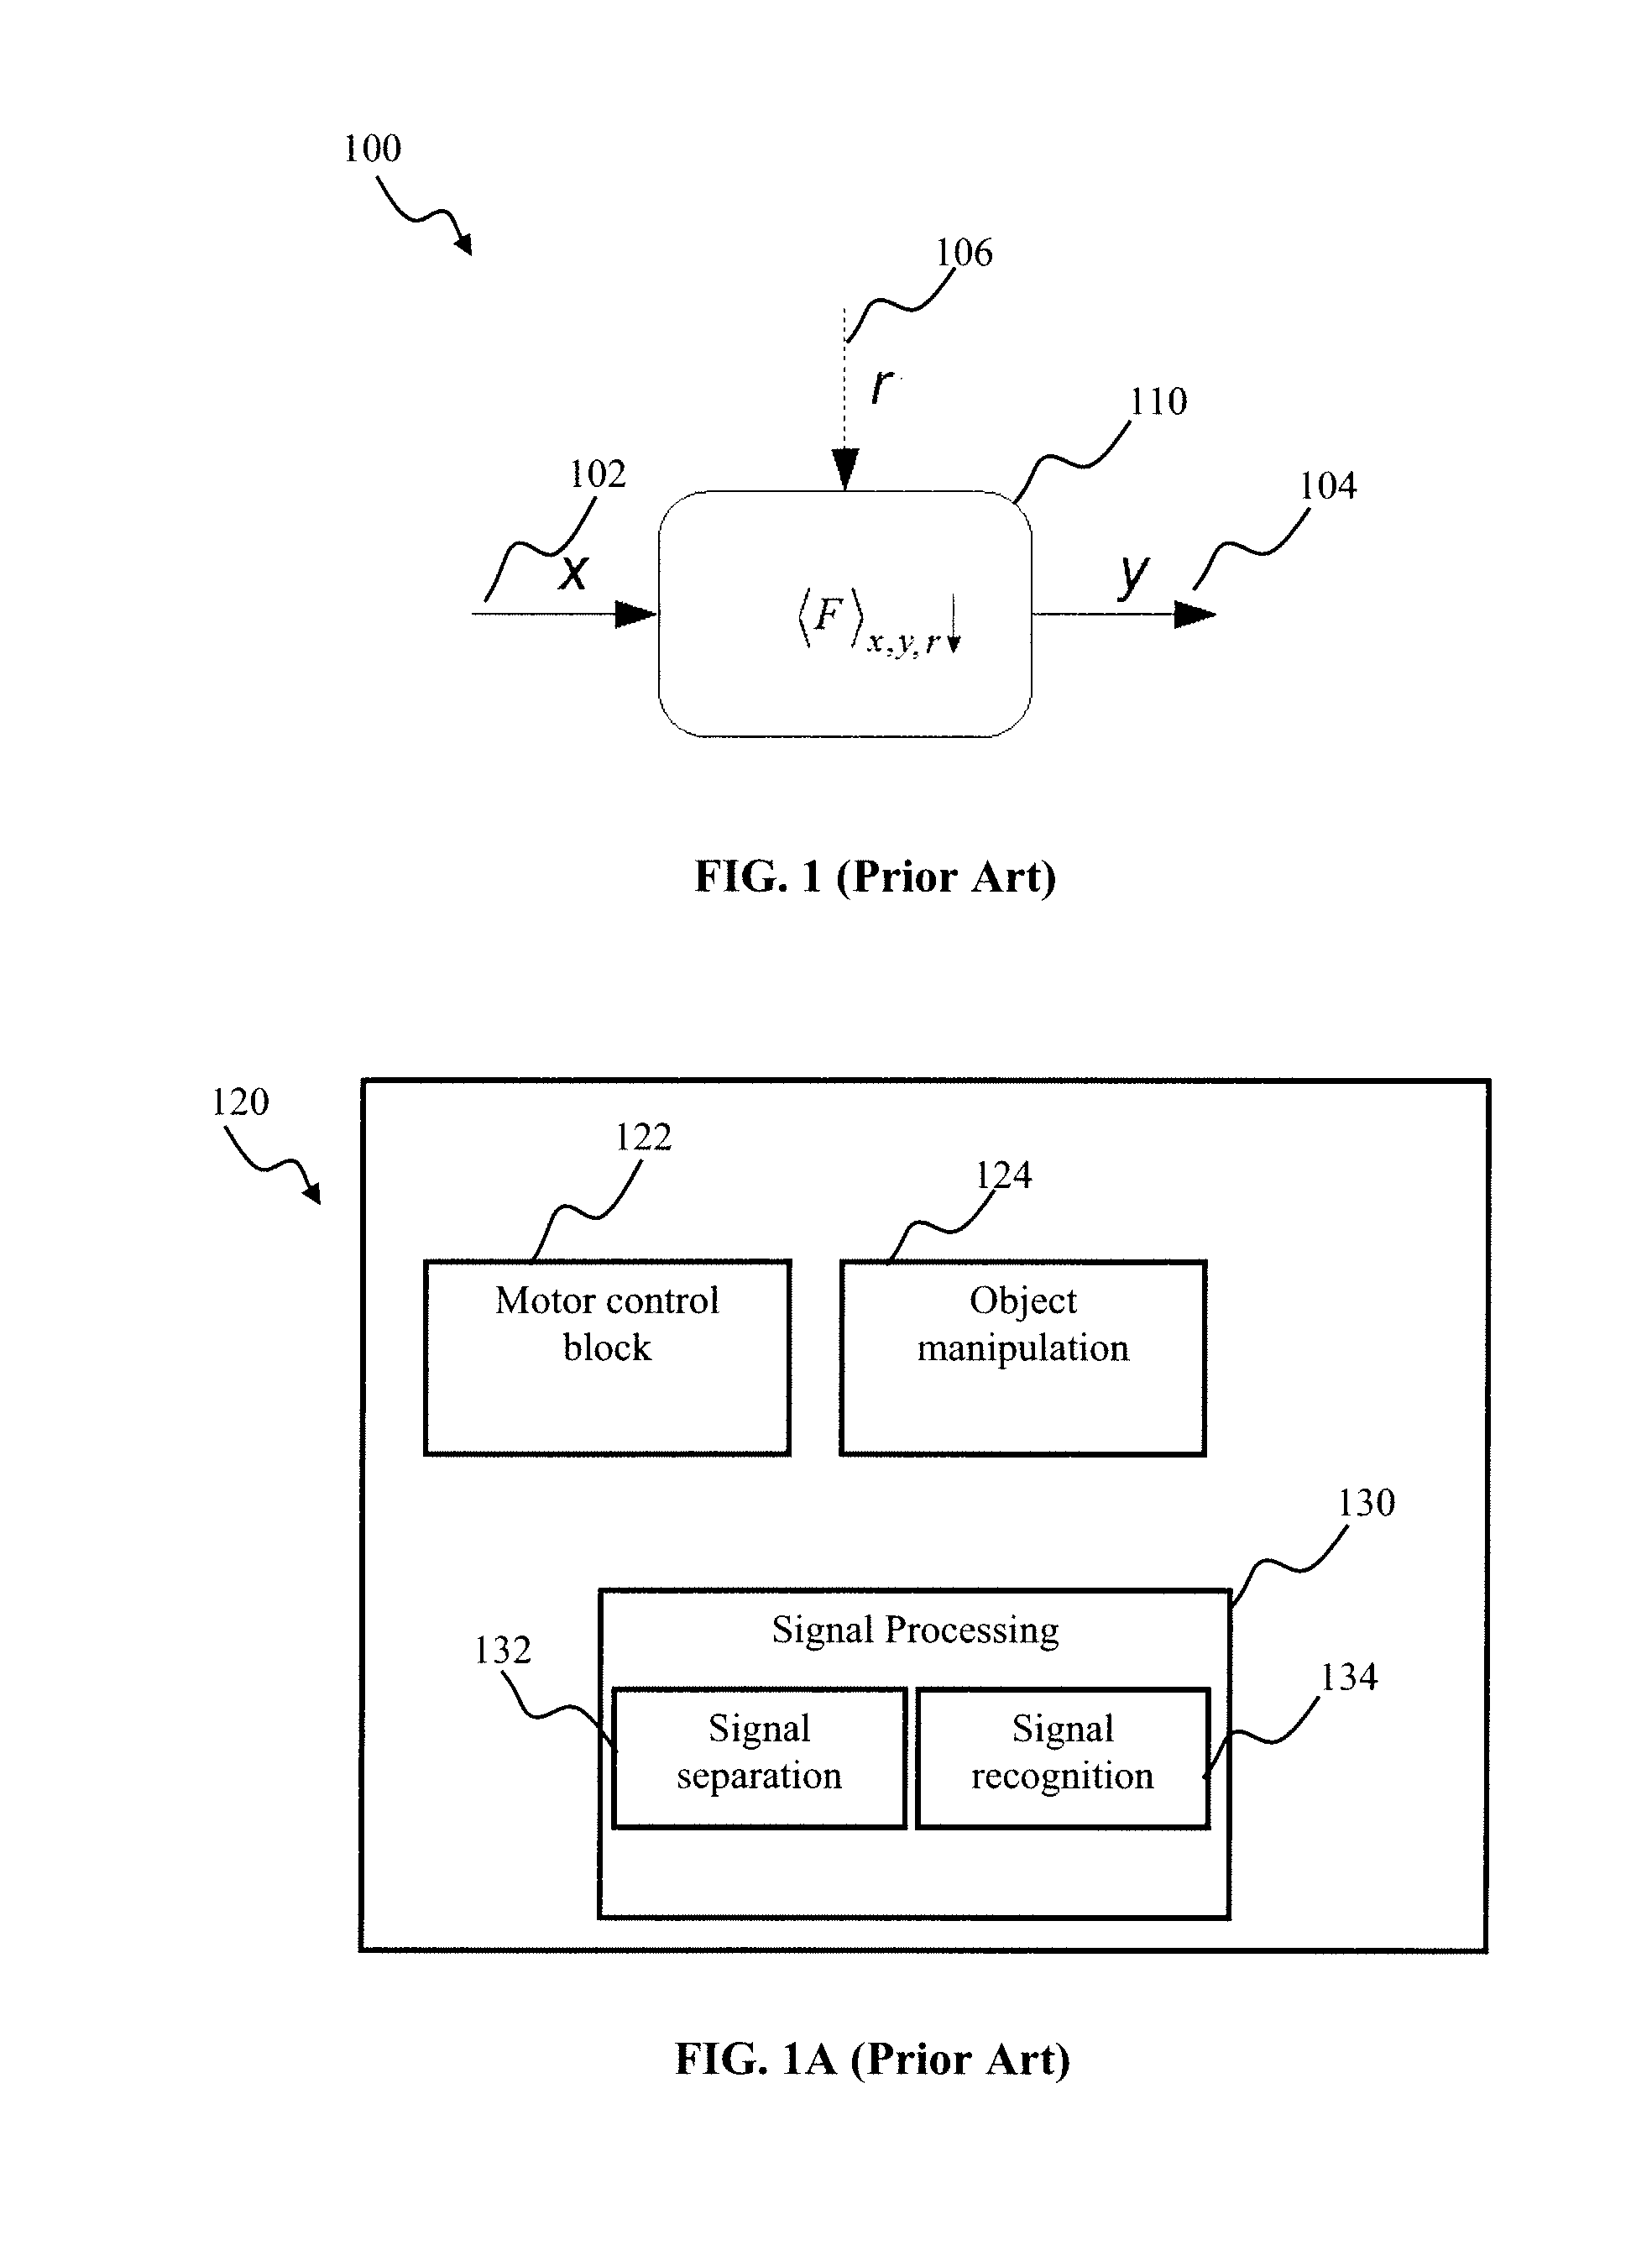 Stochastic apparatus and methods for implementing generalized learning rules